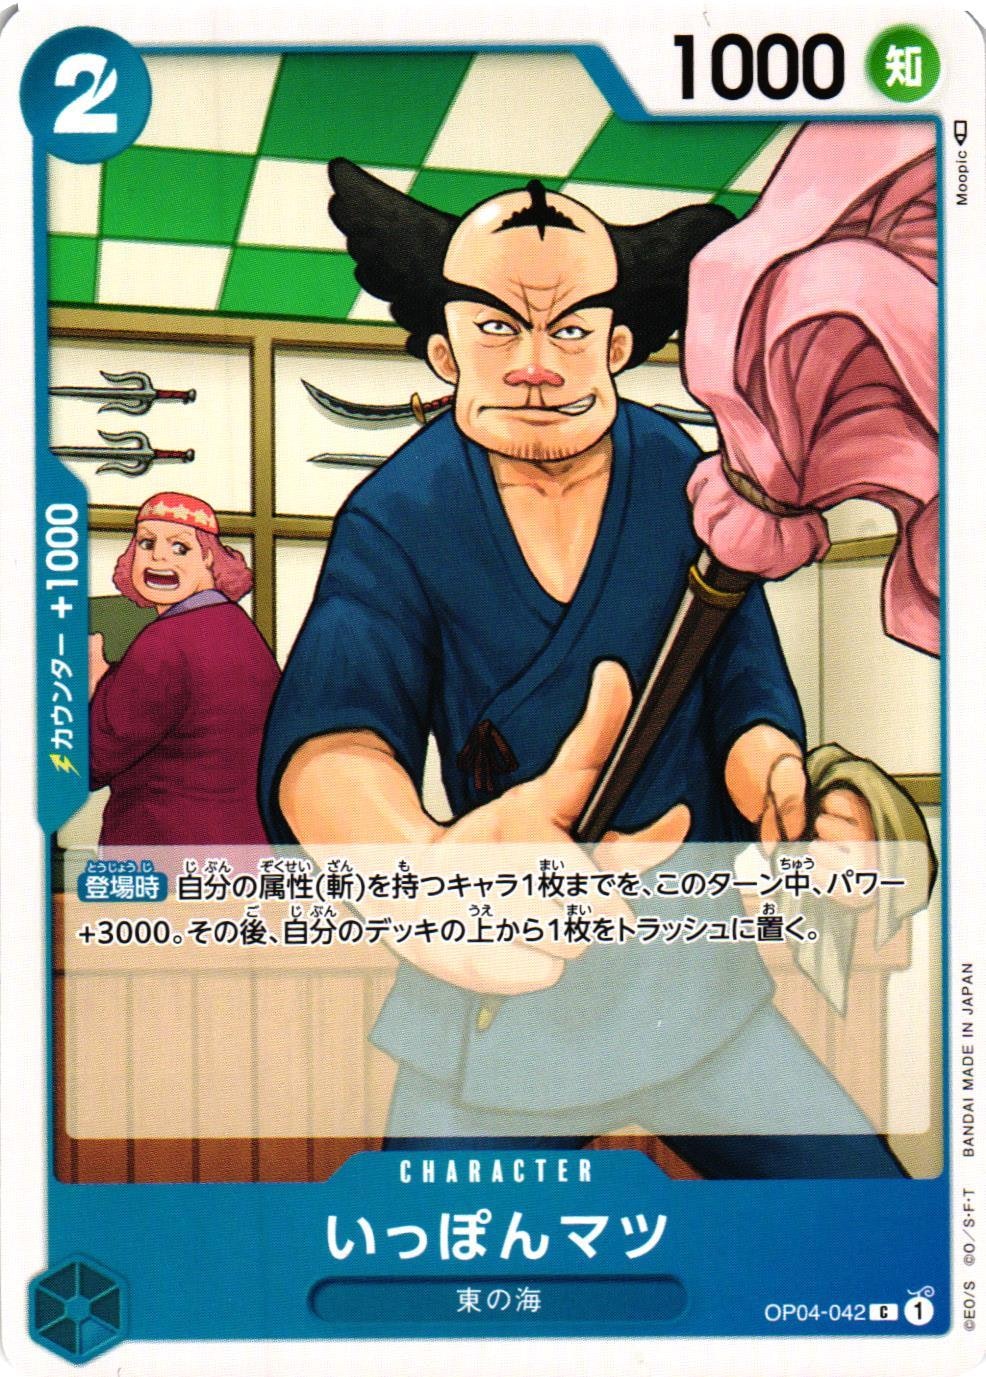 Ipponmatsu Common OP04-042 Kingdoms of Intrigue One Piece